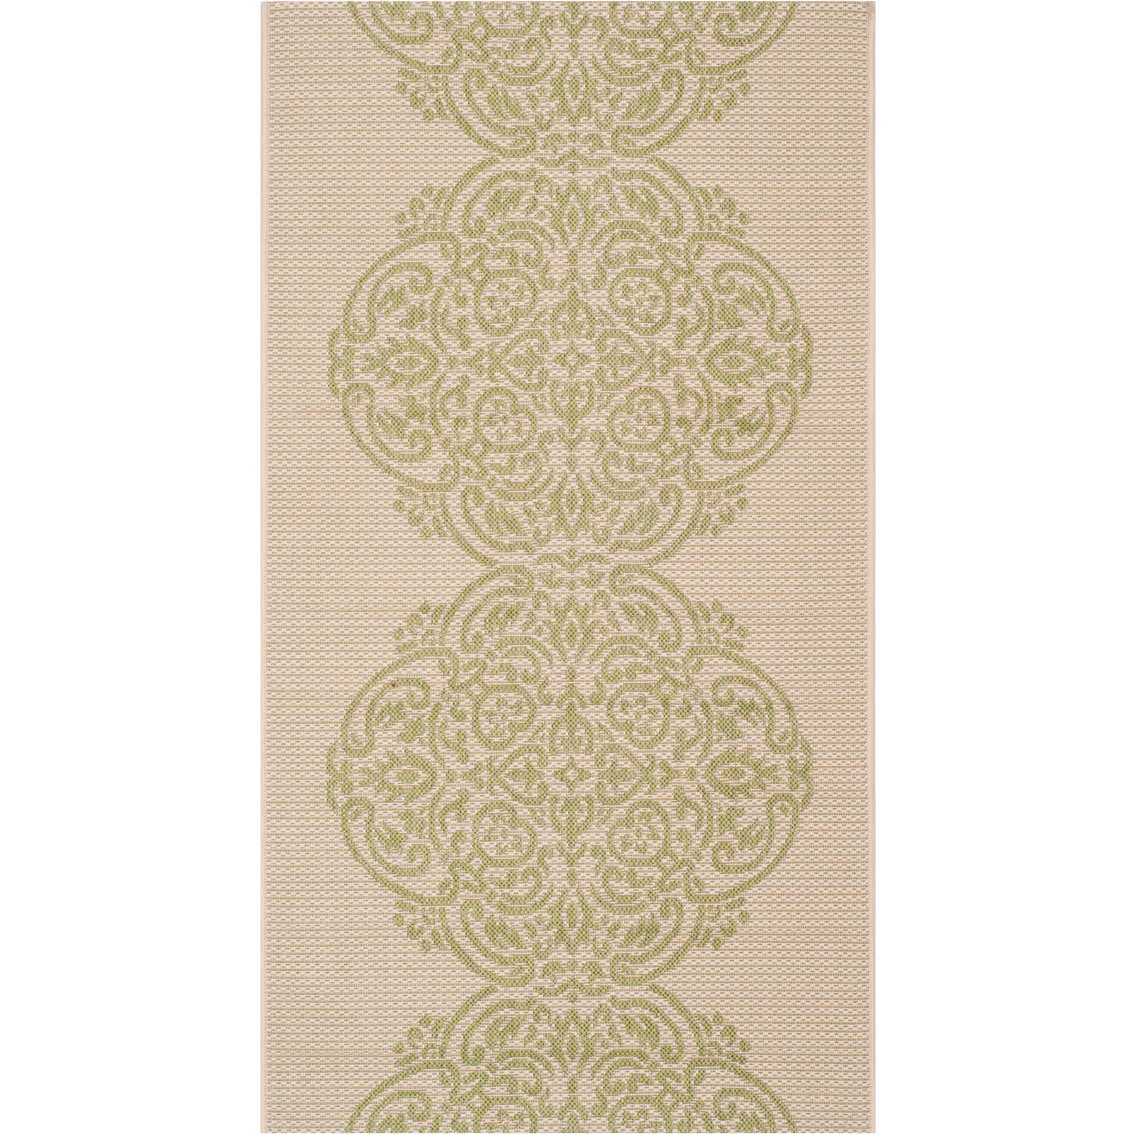 Martha Stewart Collection Topiary Signet Area Rug - Image 1 of 2